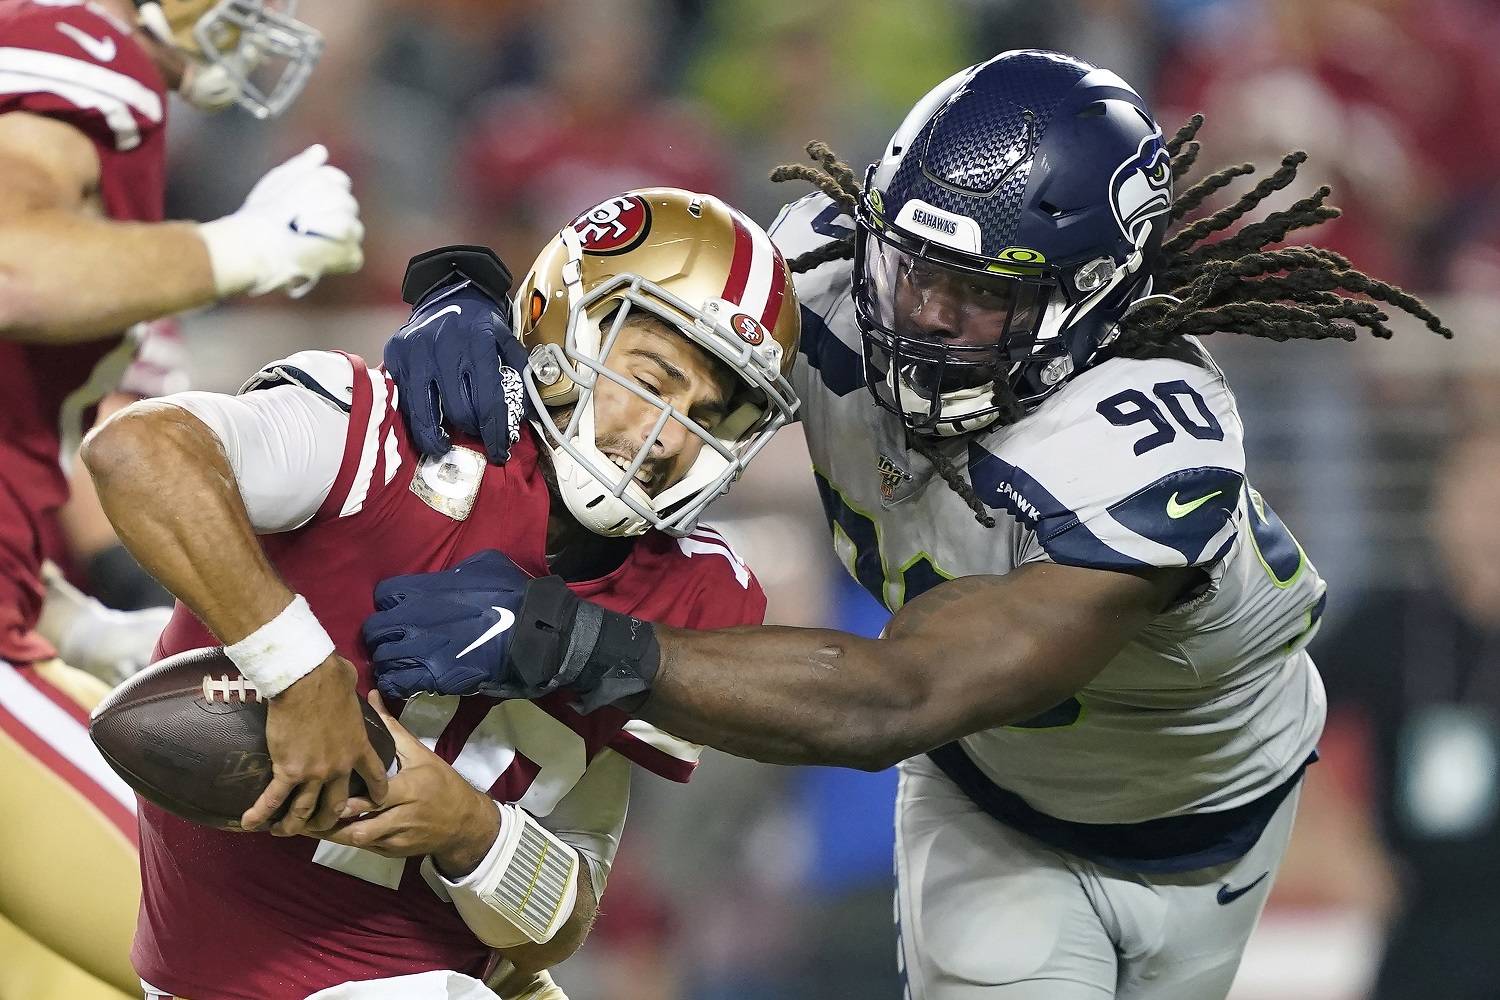 Tony Avelar/The Associated Press San Francisco 49ers quarterback Jimmy Garoppolo, left, avoids being sacked by Seattle Seahawks defensive end Jadeveon Clowney (90) in Santa Clara, Calif., in November 2019. The Tennessee Titans announced Sunday that they had signed Clowney.                                San Francisco 49ers quarterback Jimmy Garoppolo, left, avoids being sacked by Seattle Seahawks defensive end Jadeveon Clowney (90) in Santa Clara, Calif., in November 2019. The Tennessee Titans announced Sunday that they had signed Clowney. (Tony Avelar/The Associated Press)